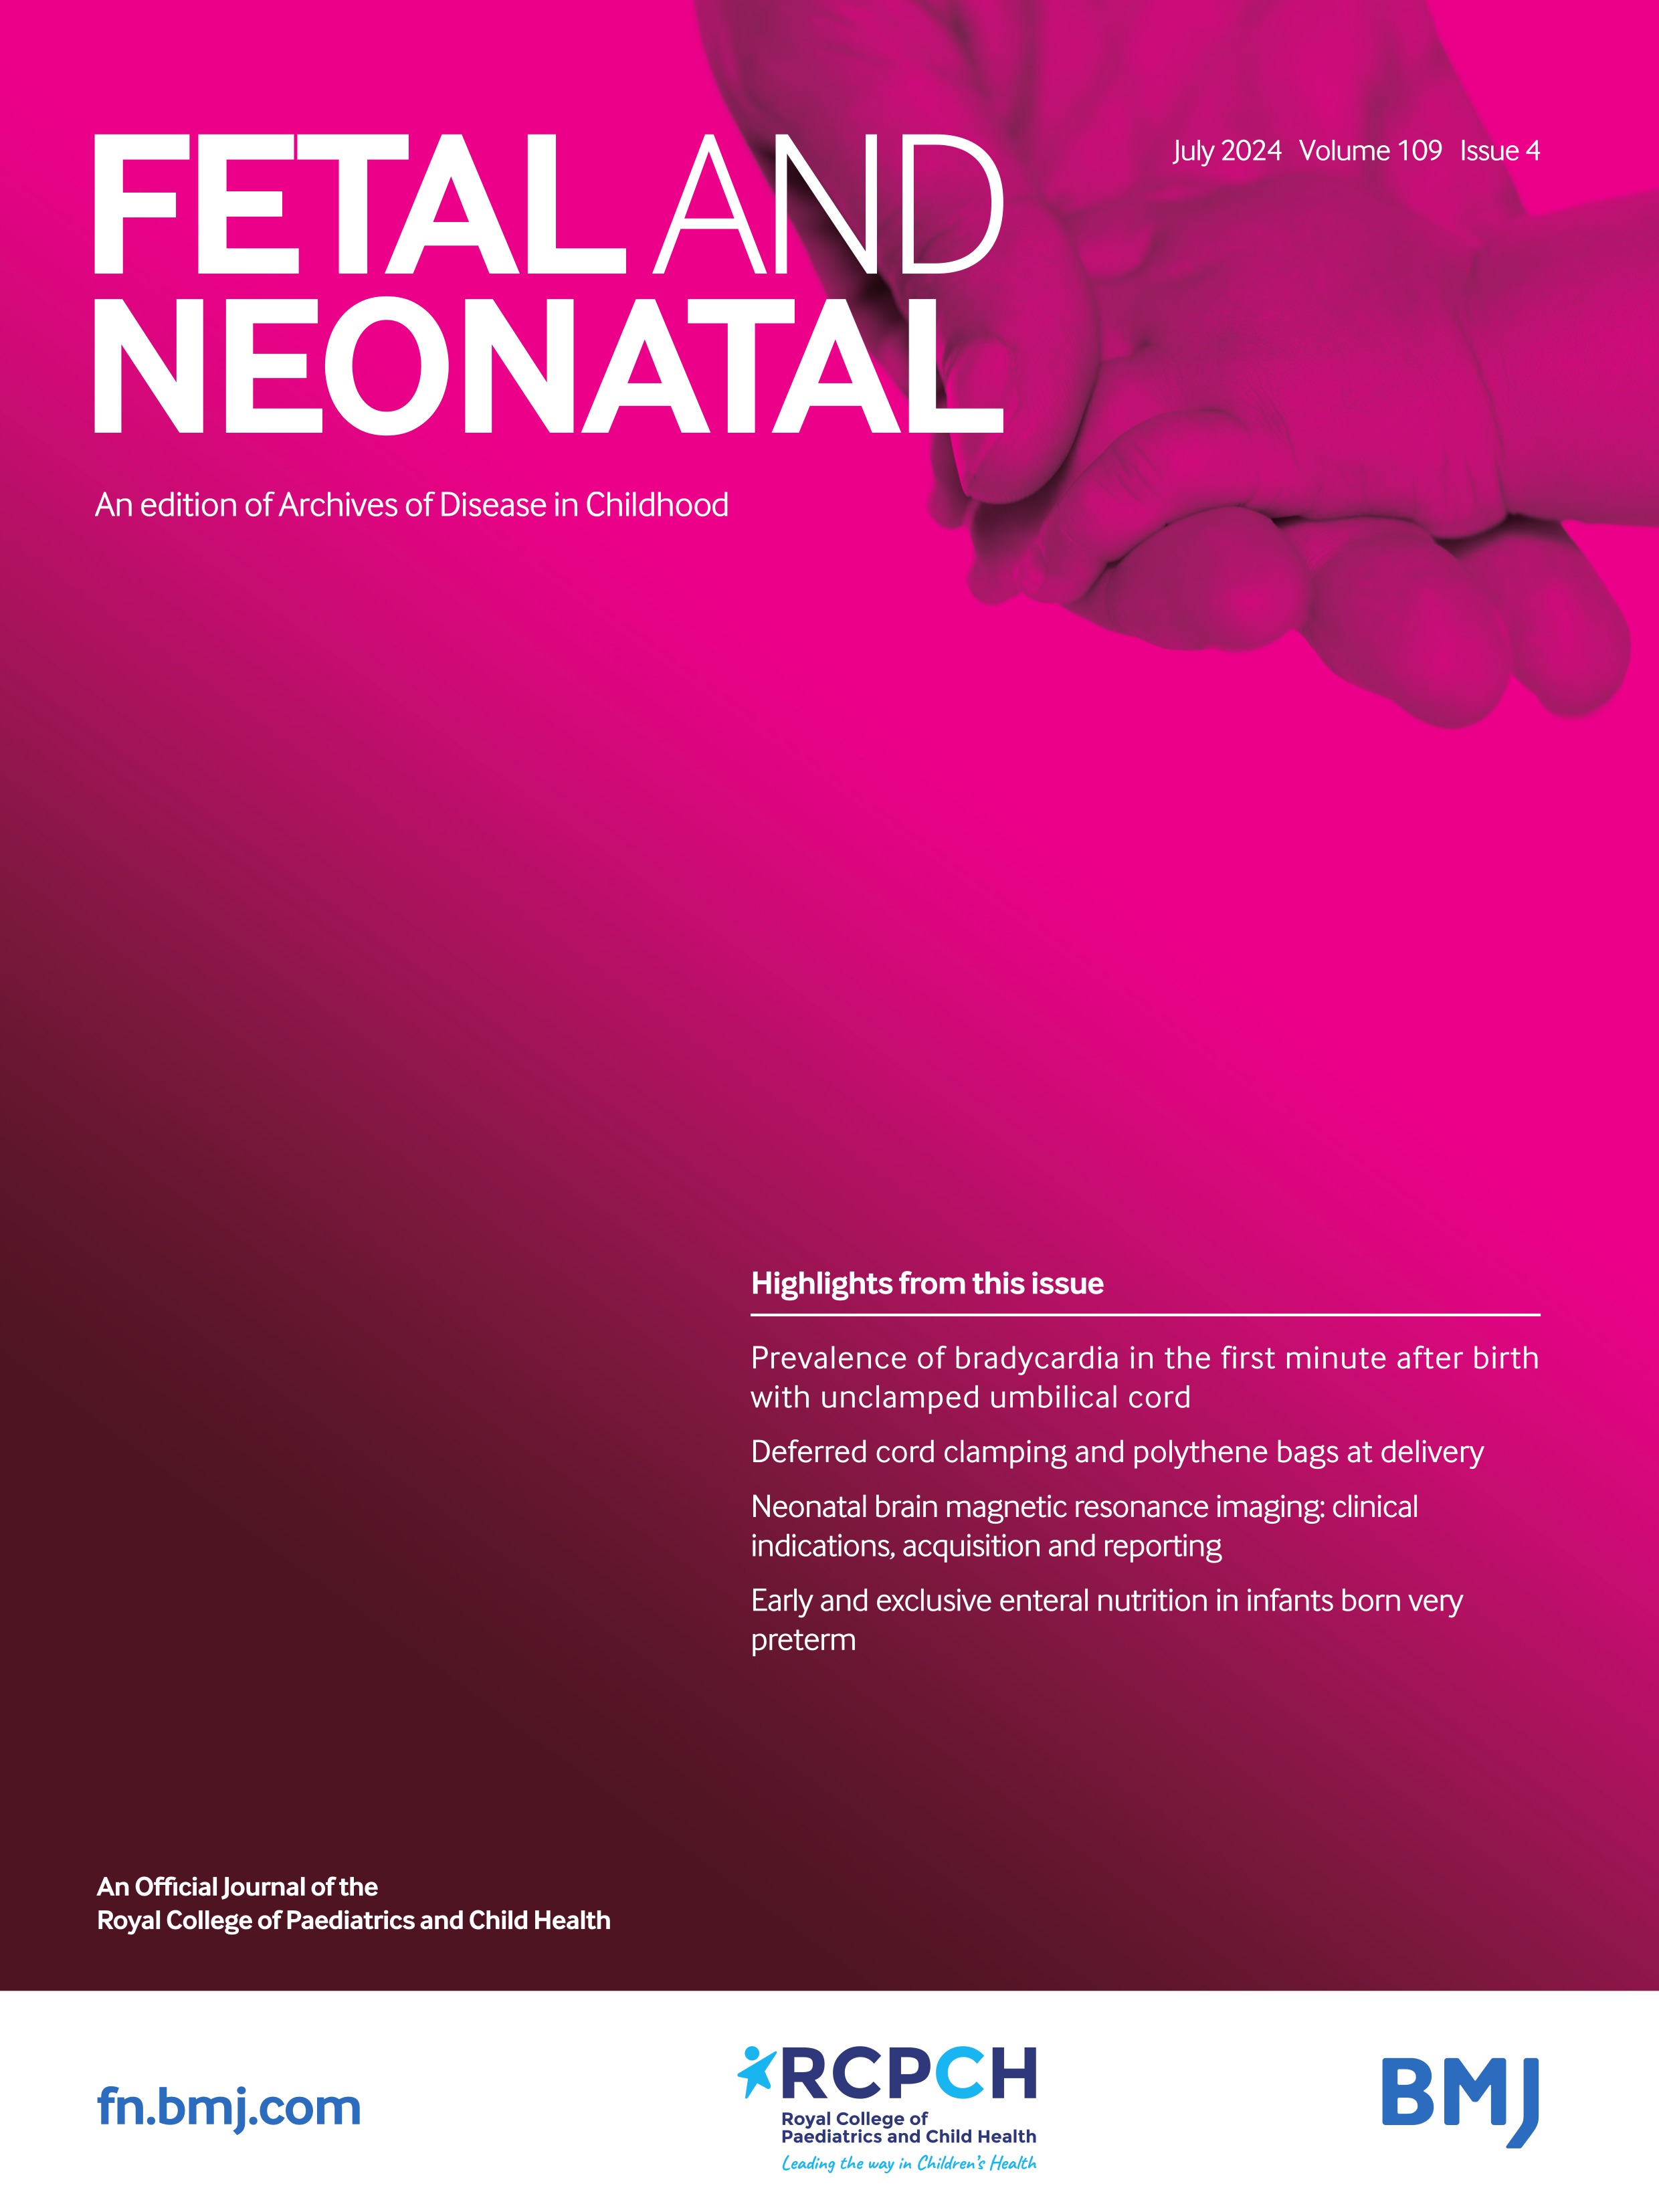 Neonatal brain magnetic resonance imaging: clinical indications, acquisition and reporting